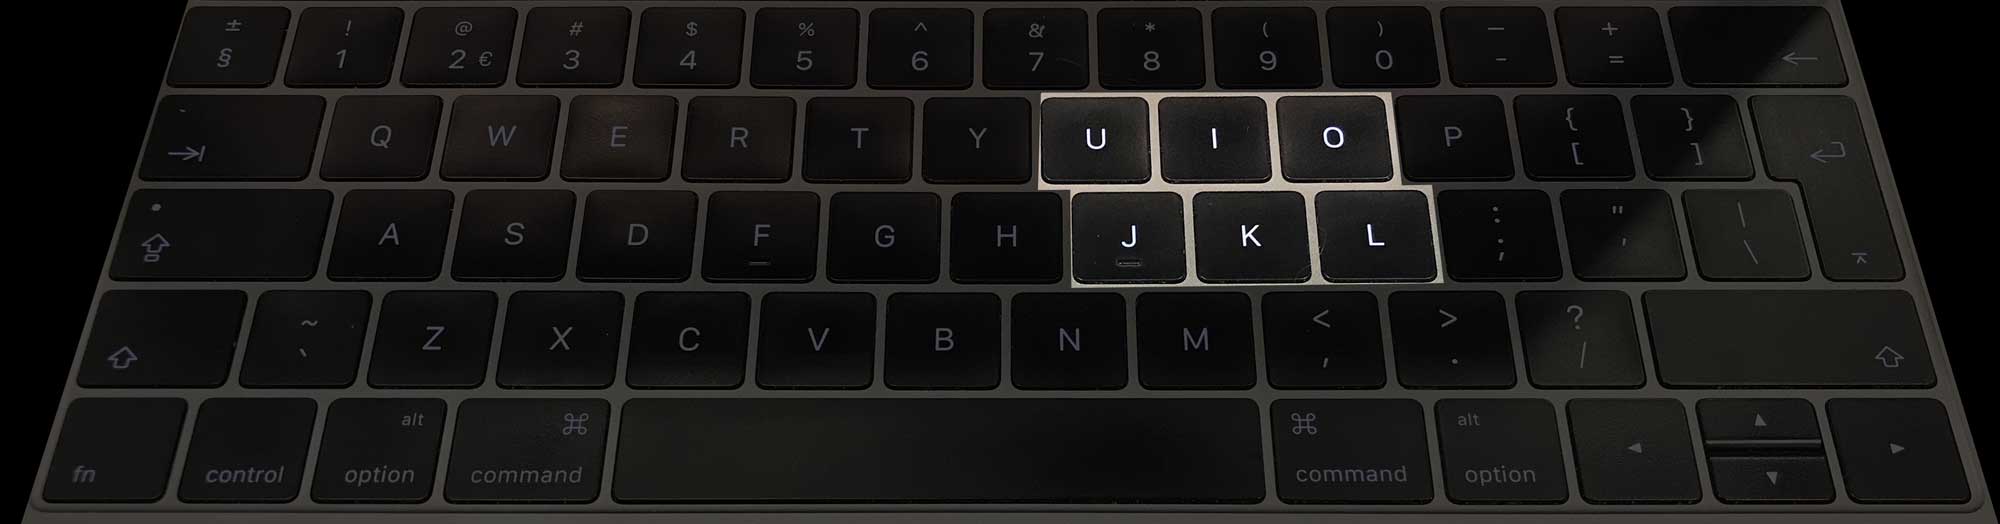 A keyboard with the letters u, i, o, j, k, and l highlighted